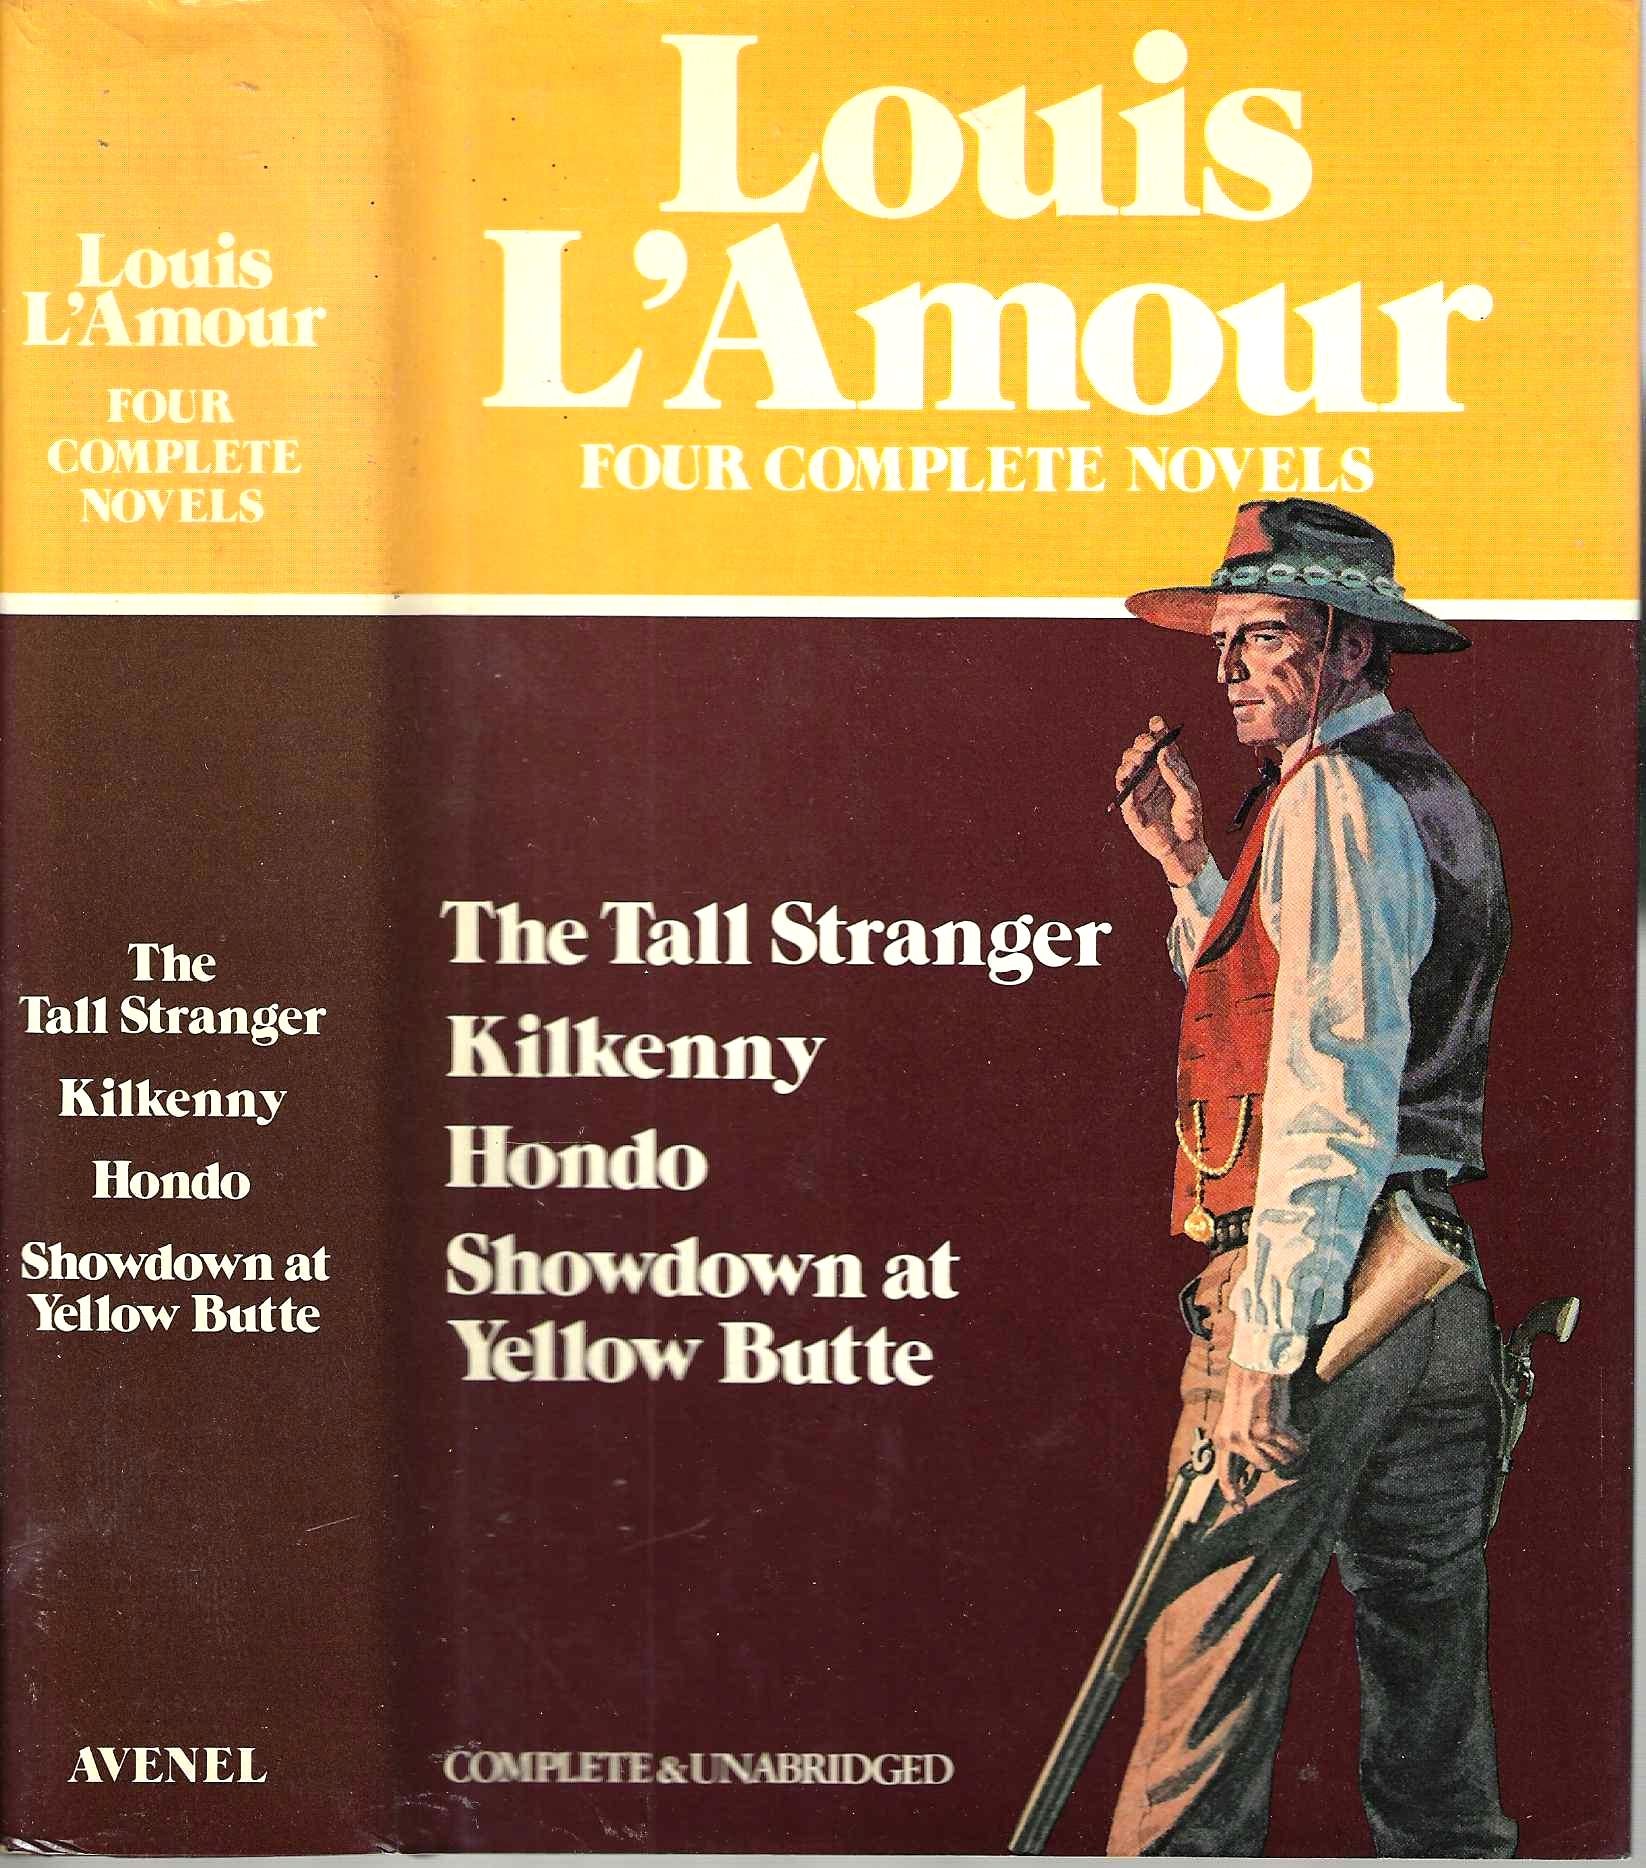 Books By Louis L'Amour